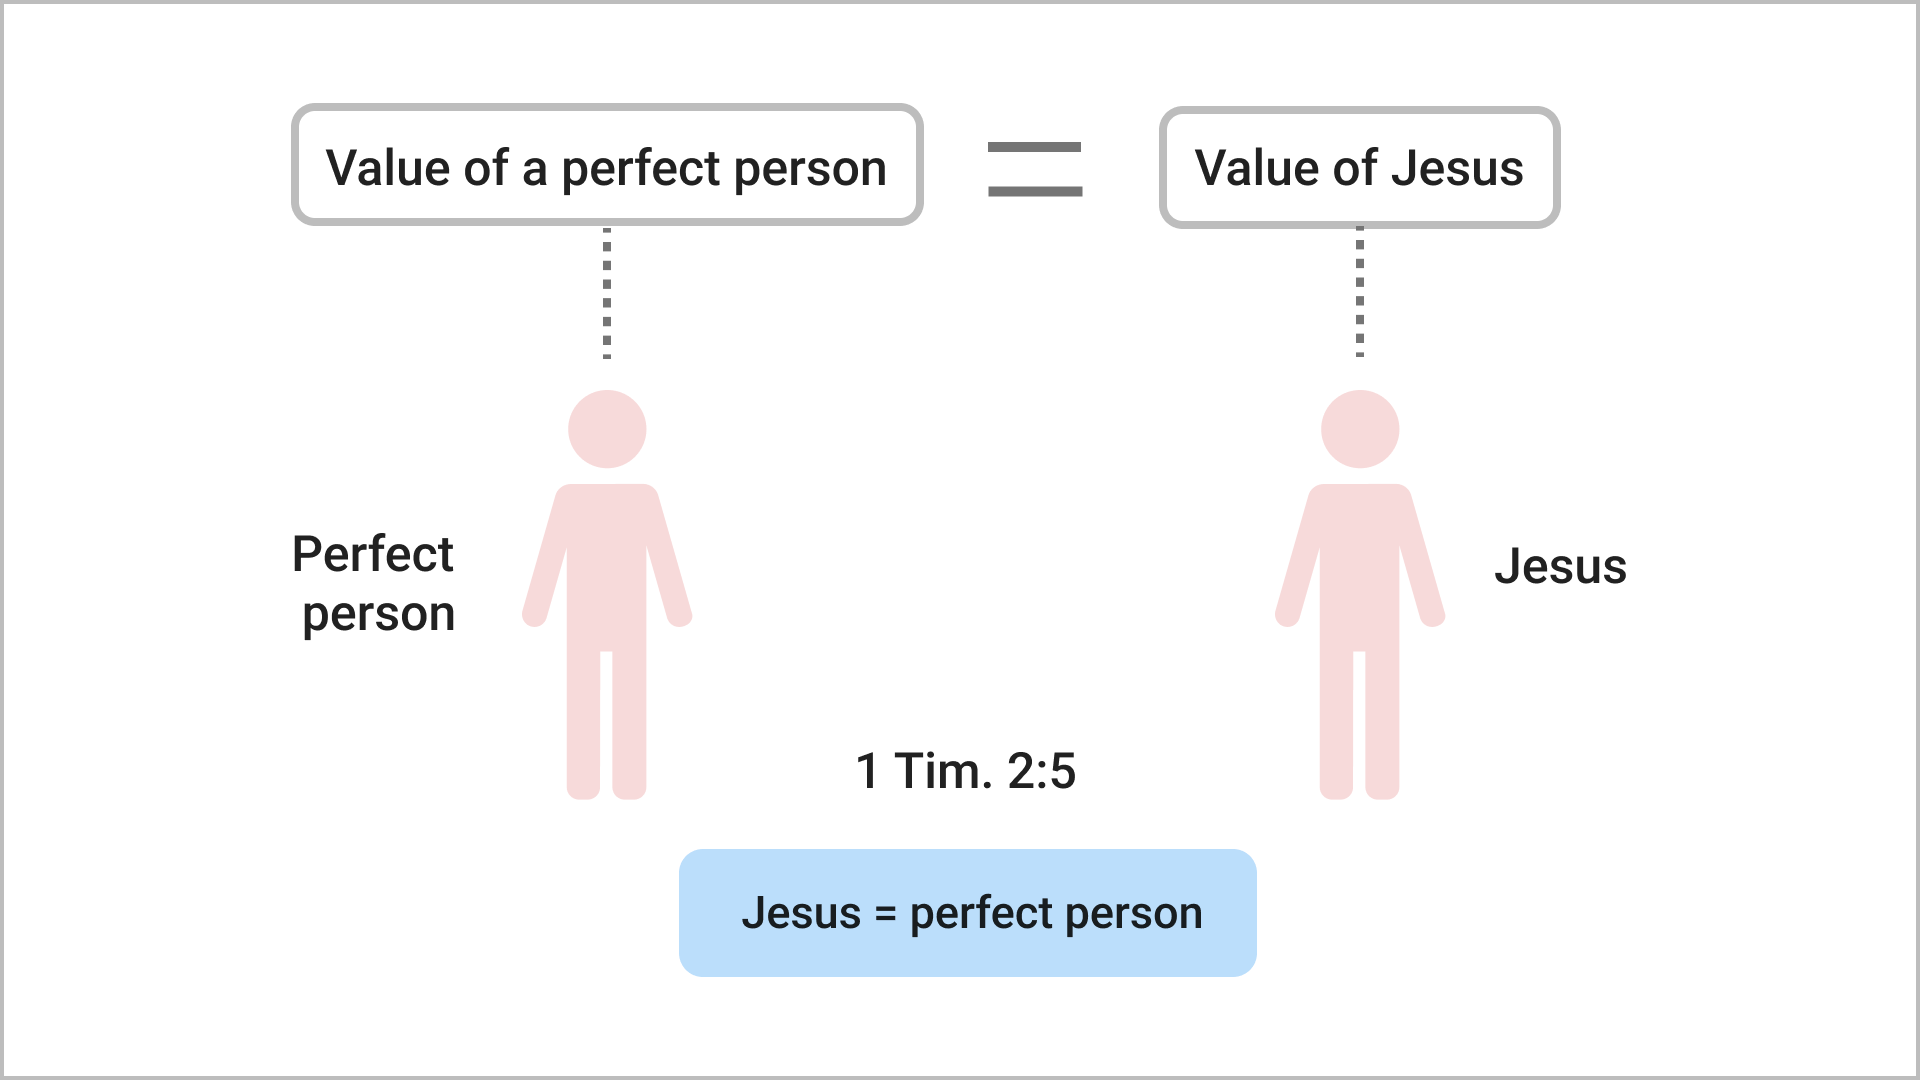 Jesus, Human Beings and the Fulfillment of the Purpose of Creation